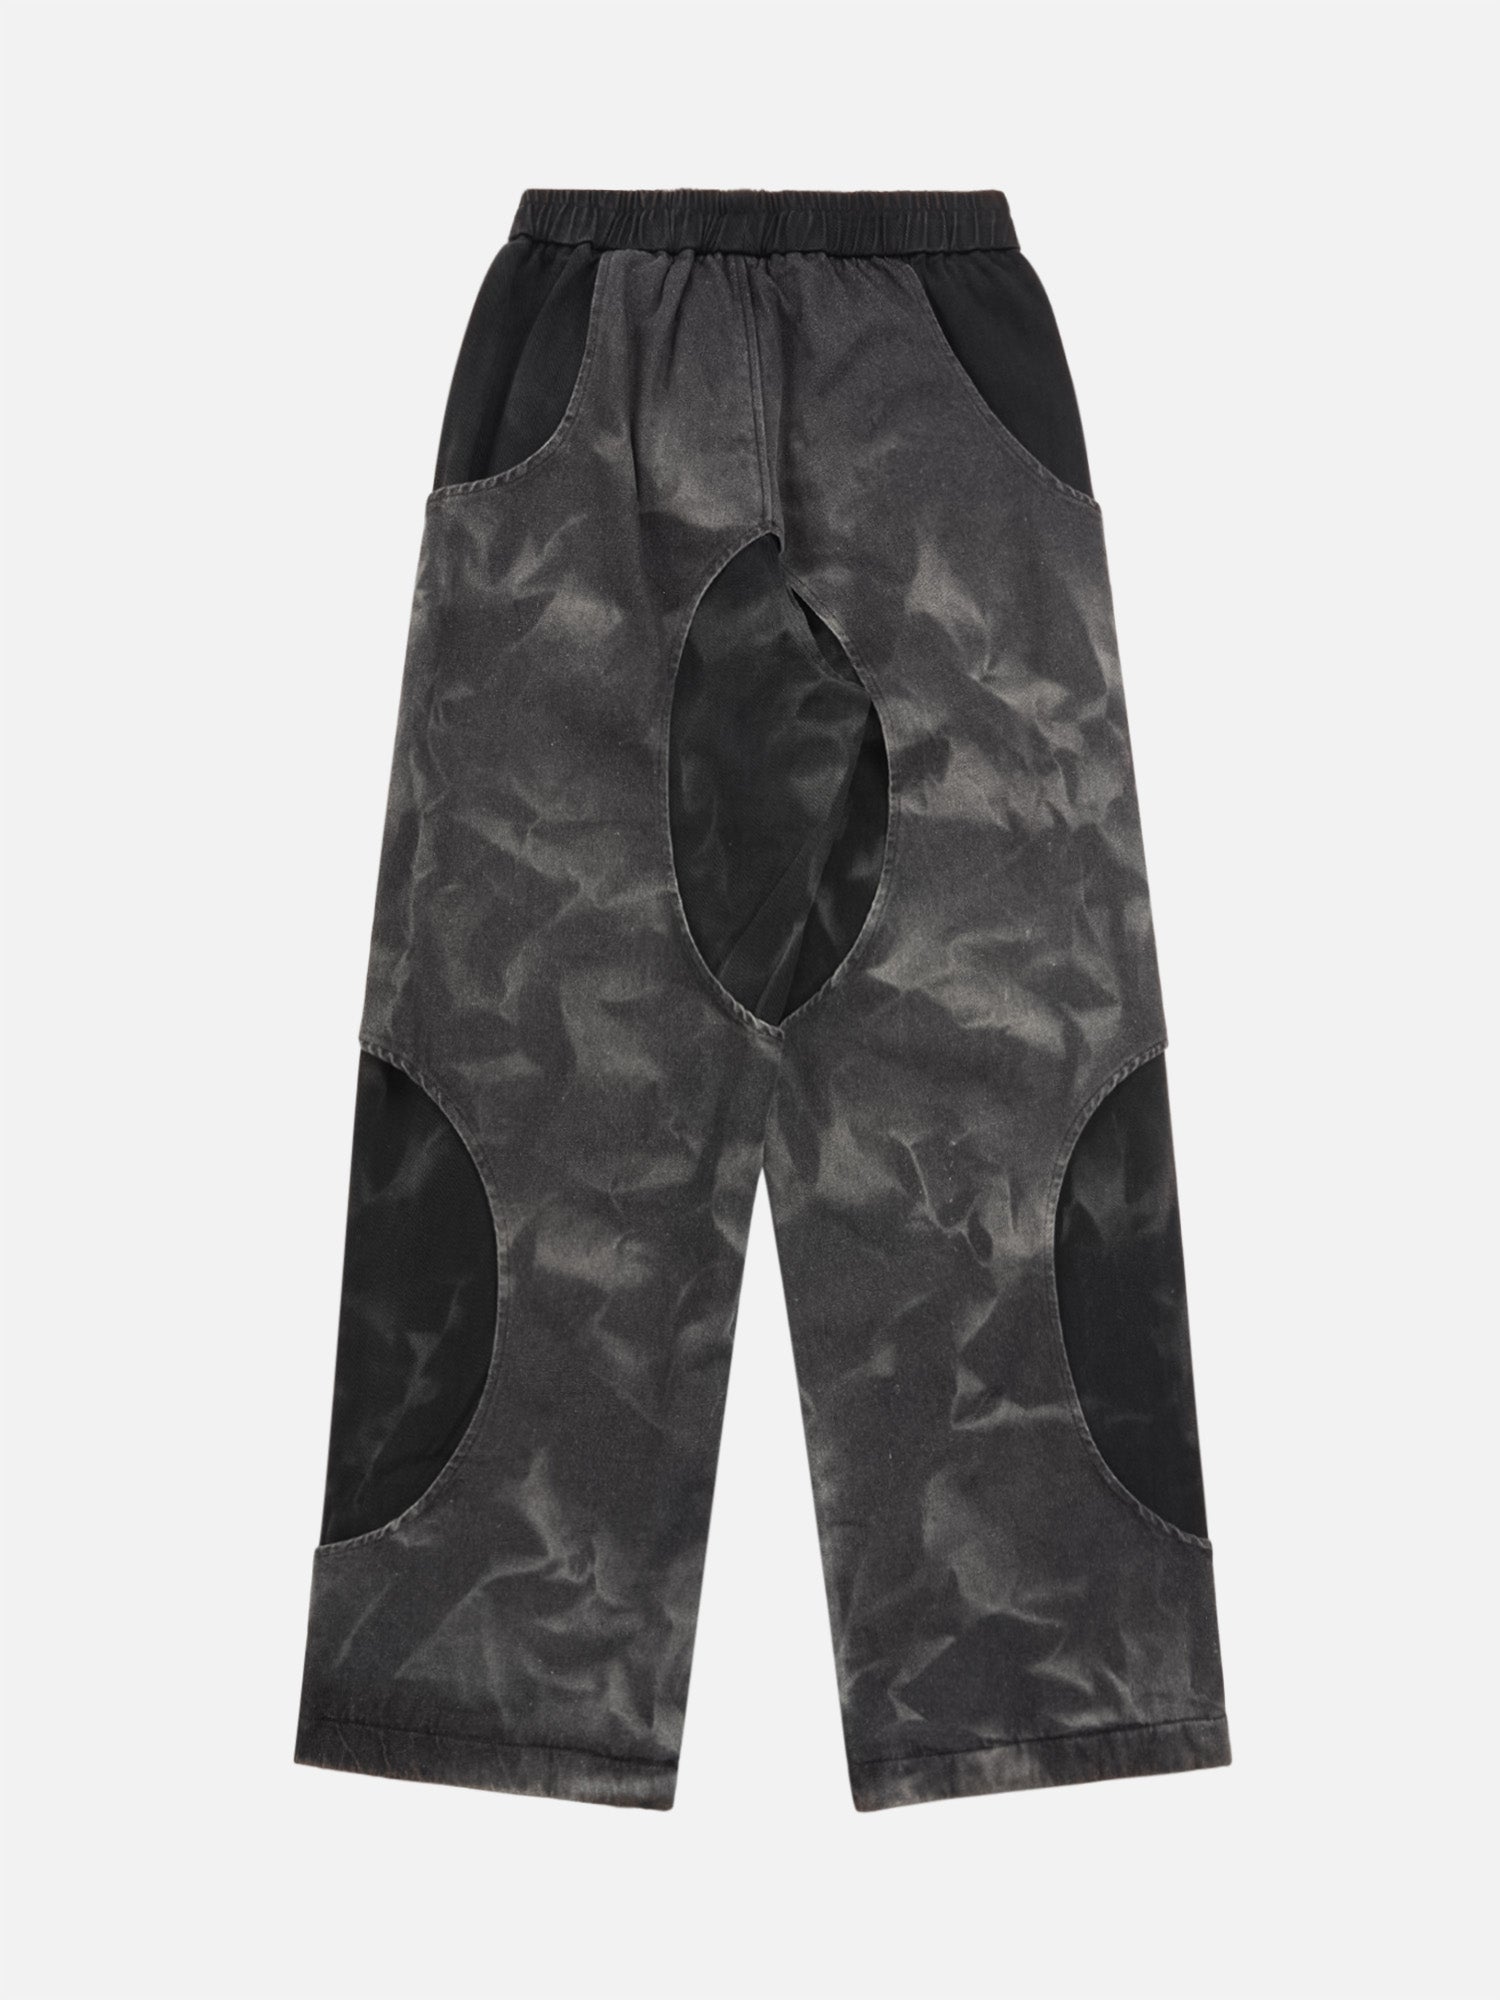 Thesupermade Distressed Tie-dye Cutout Hip-hop Sweatpants